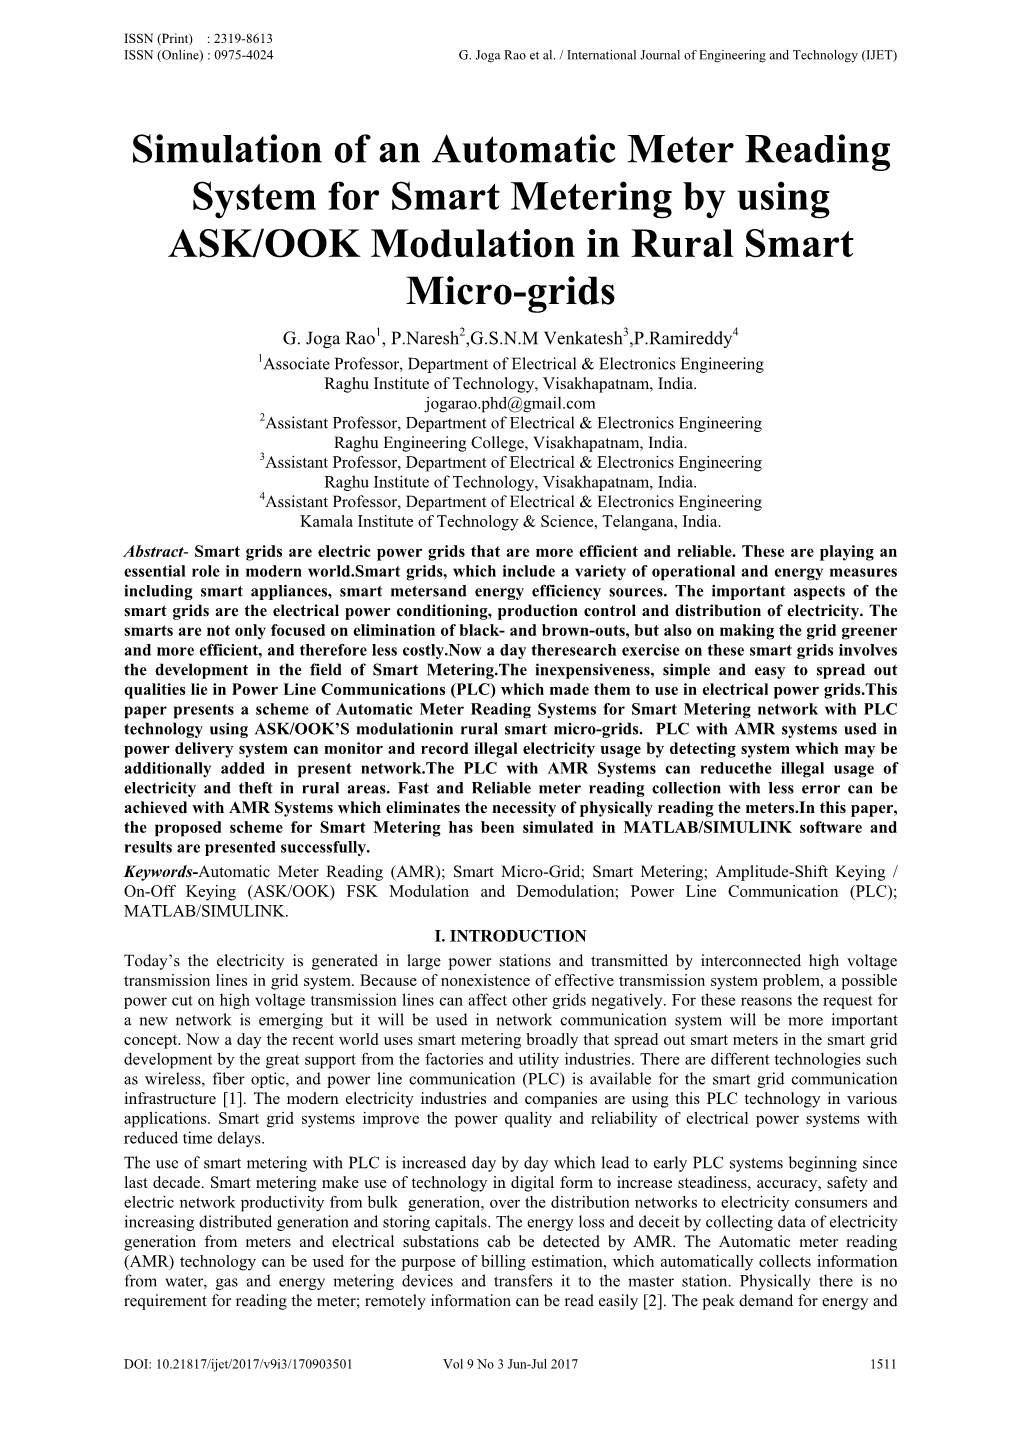 Simulation of an Automatic Meter Reading System for Smart Metering by Using ASK/OOK Modulation in Rural Smart Micro-Grids G